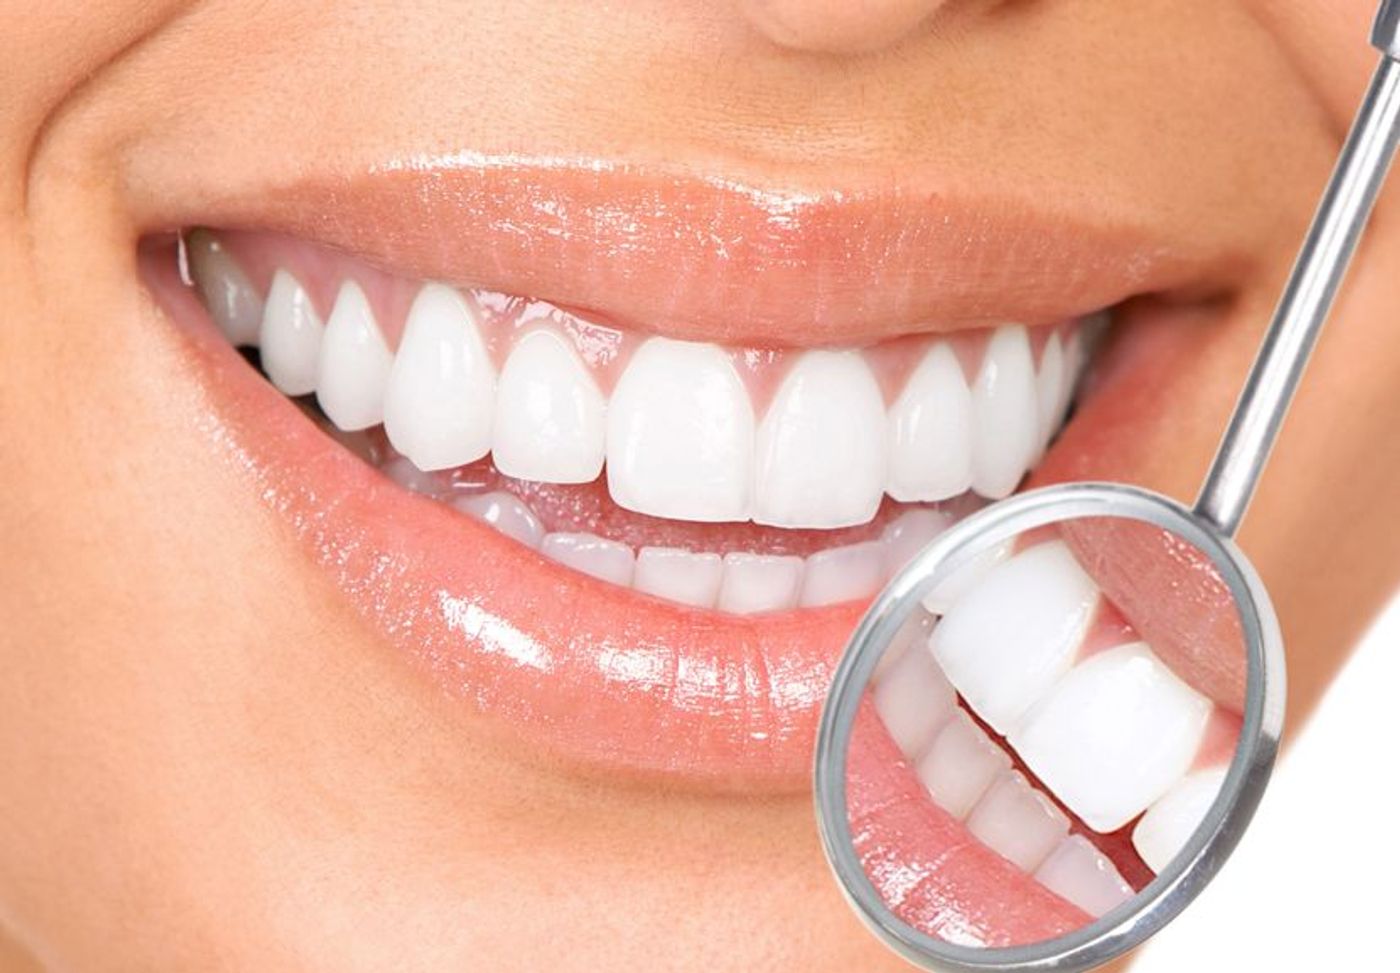 Beneficial bacteria may prevent cavities.